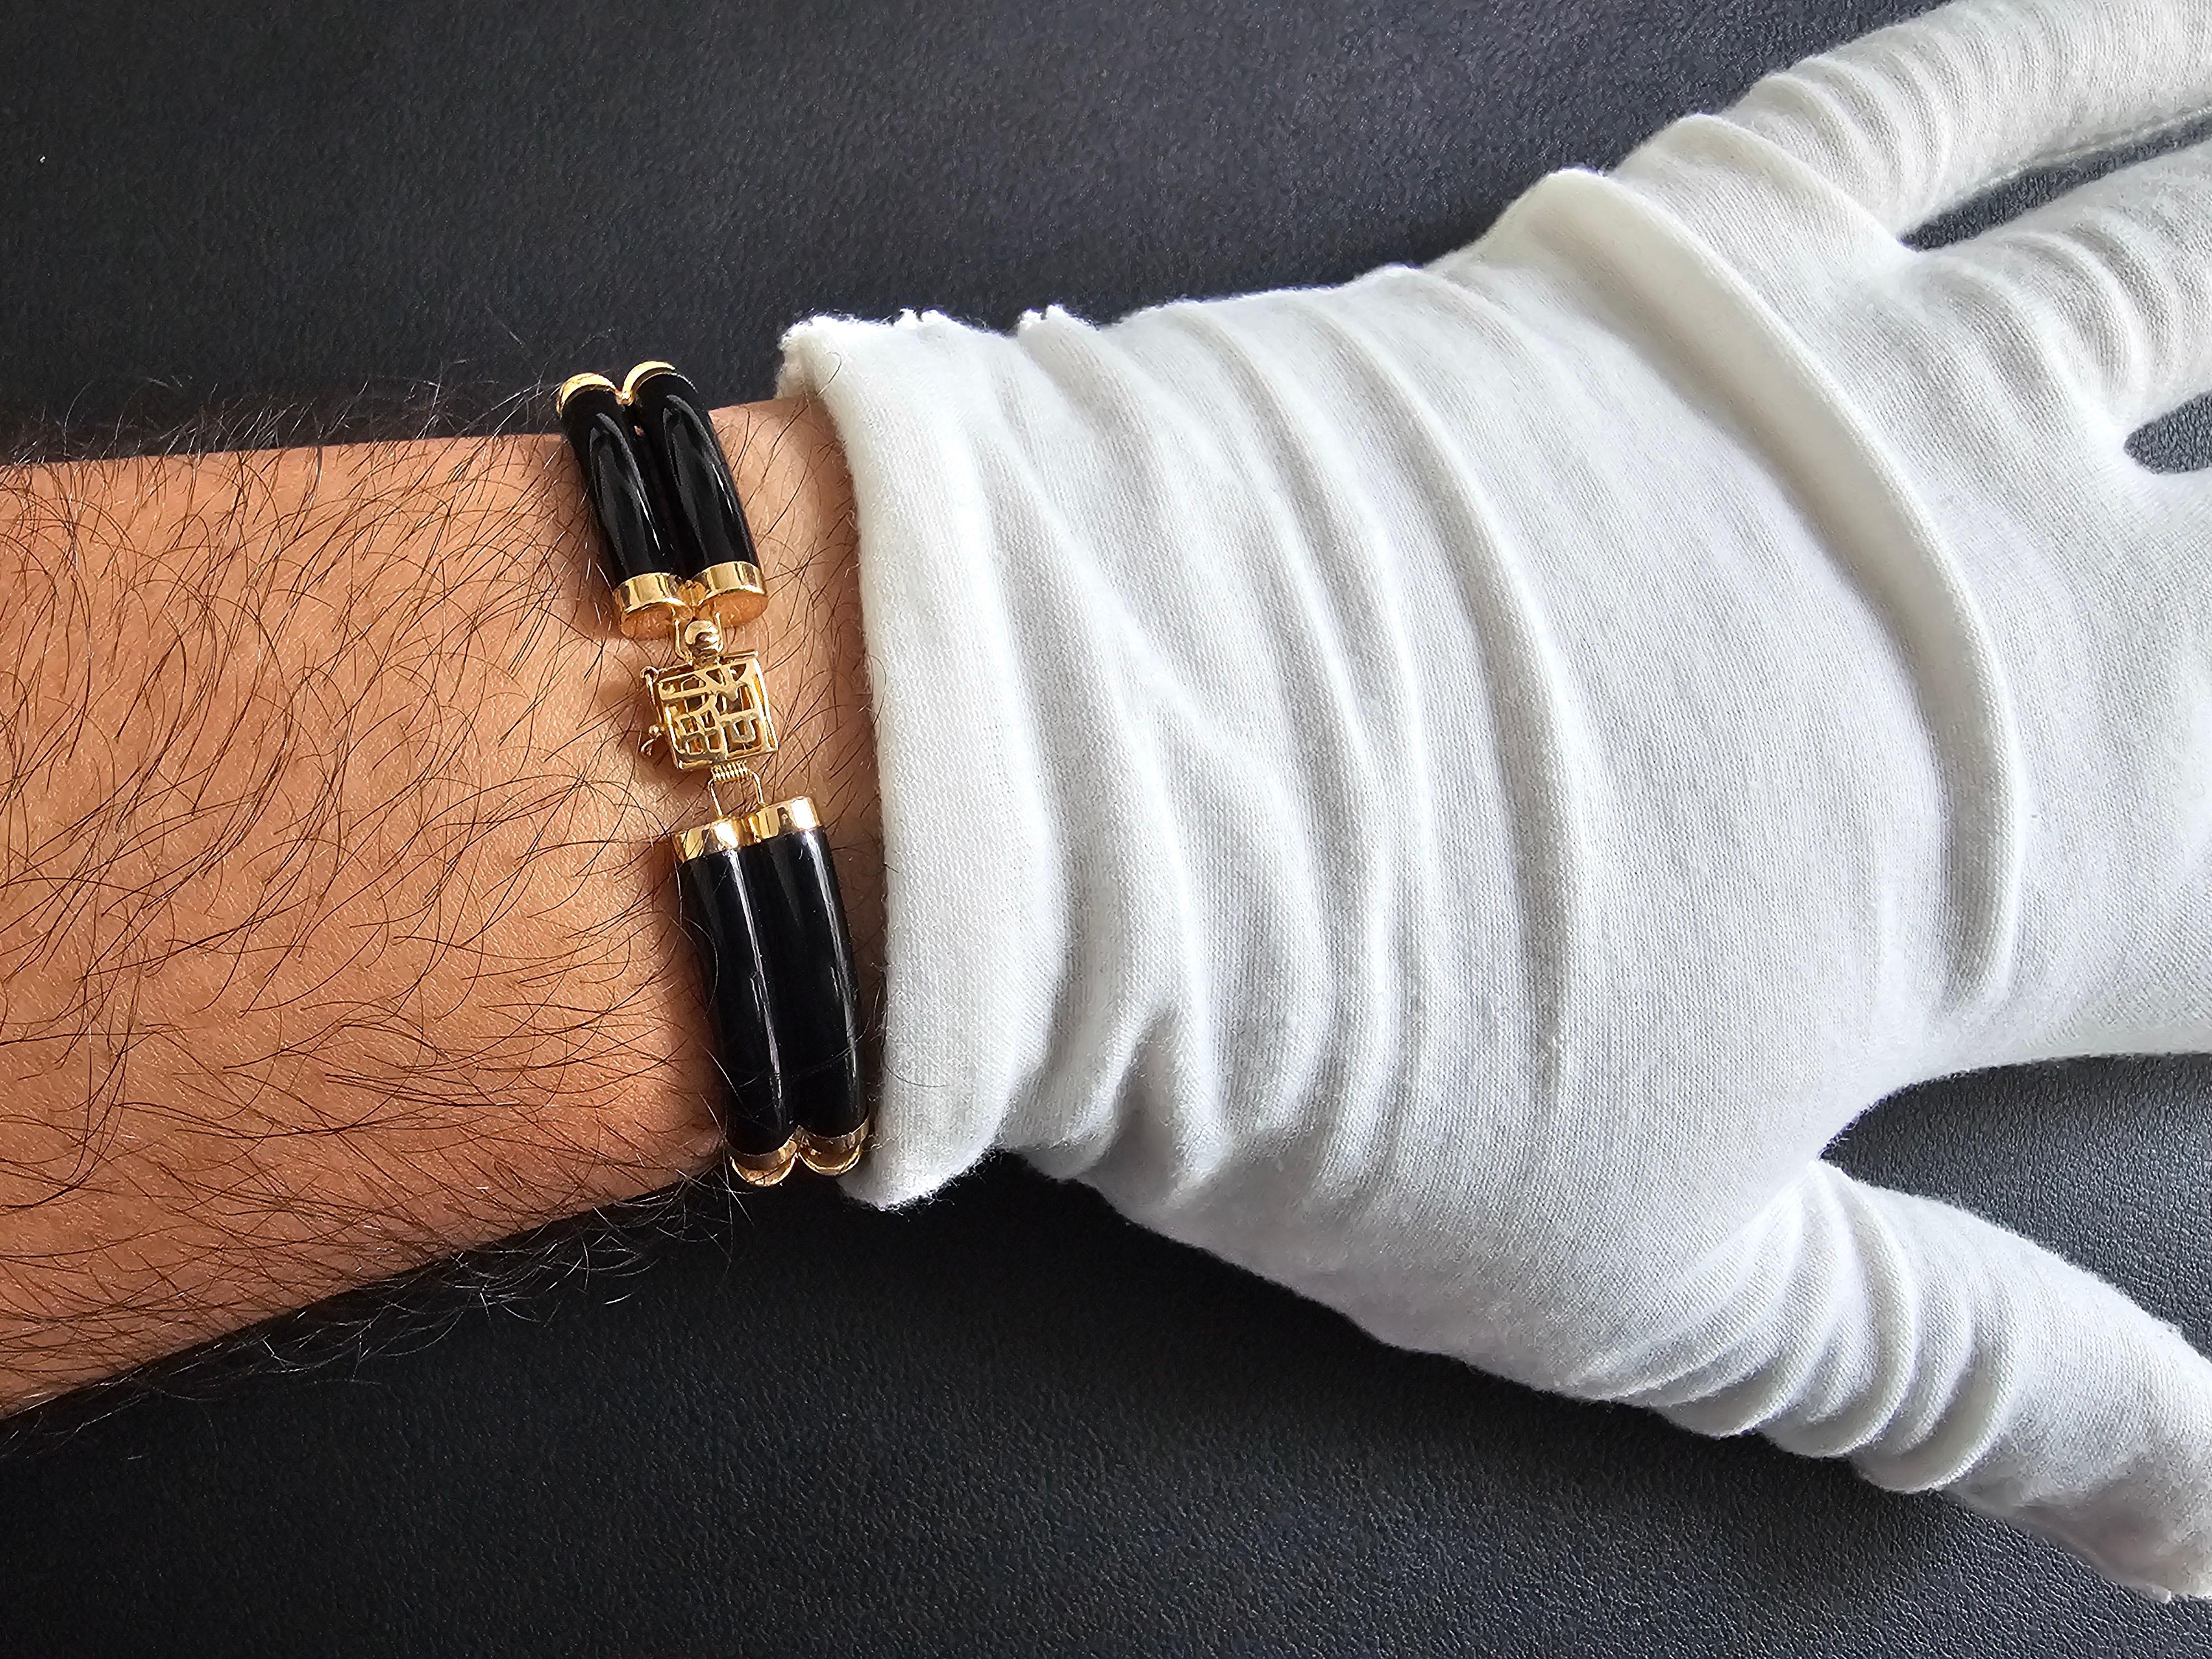 Fortune Onyx Bracelet Double Bars with 14K Solid Yellow Gold links and clasp

Our 'Double Fu Fuku Fortune Onyx Bracelet' embodies radiance and stature, with hand carved black onyx lengths intertwined with 14K Gold; a unisex statement. The two layers